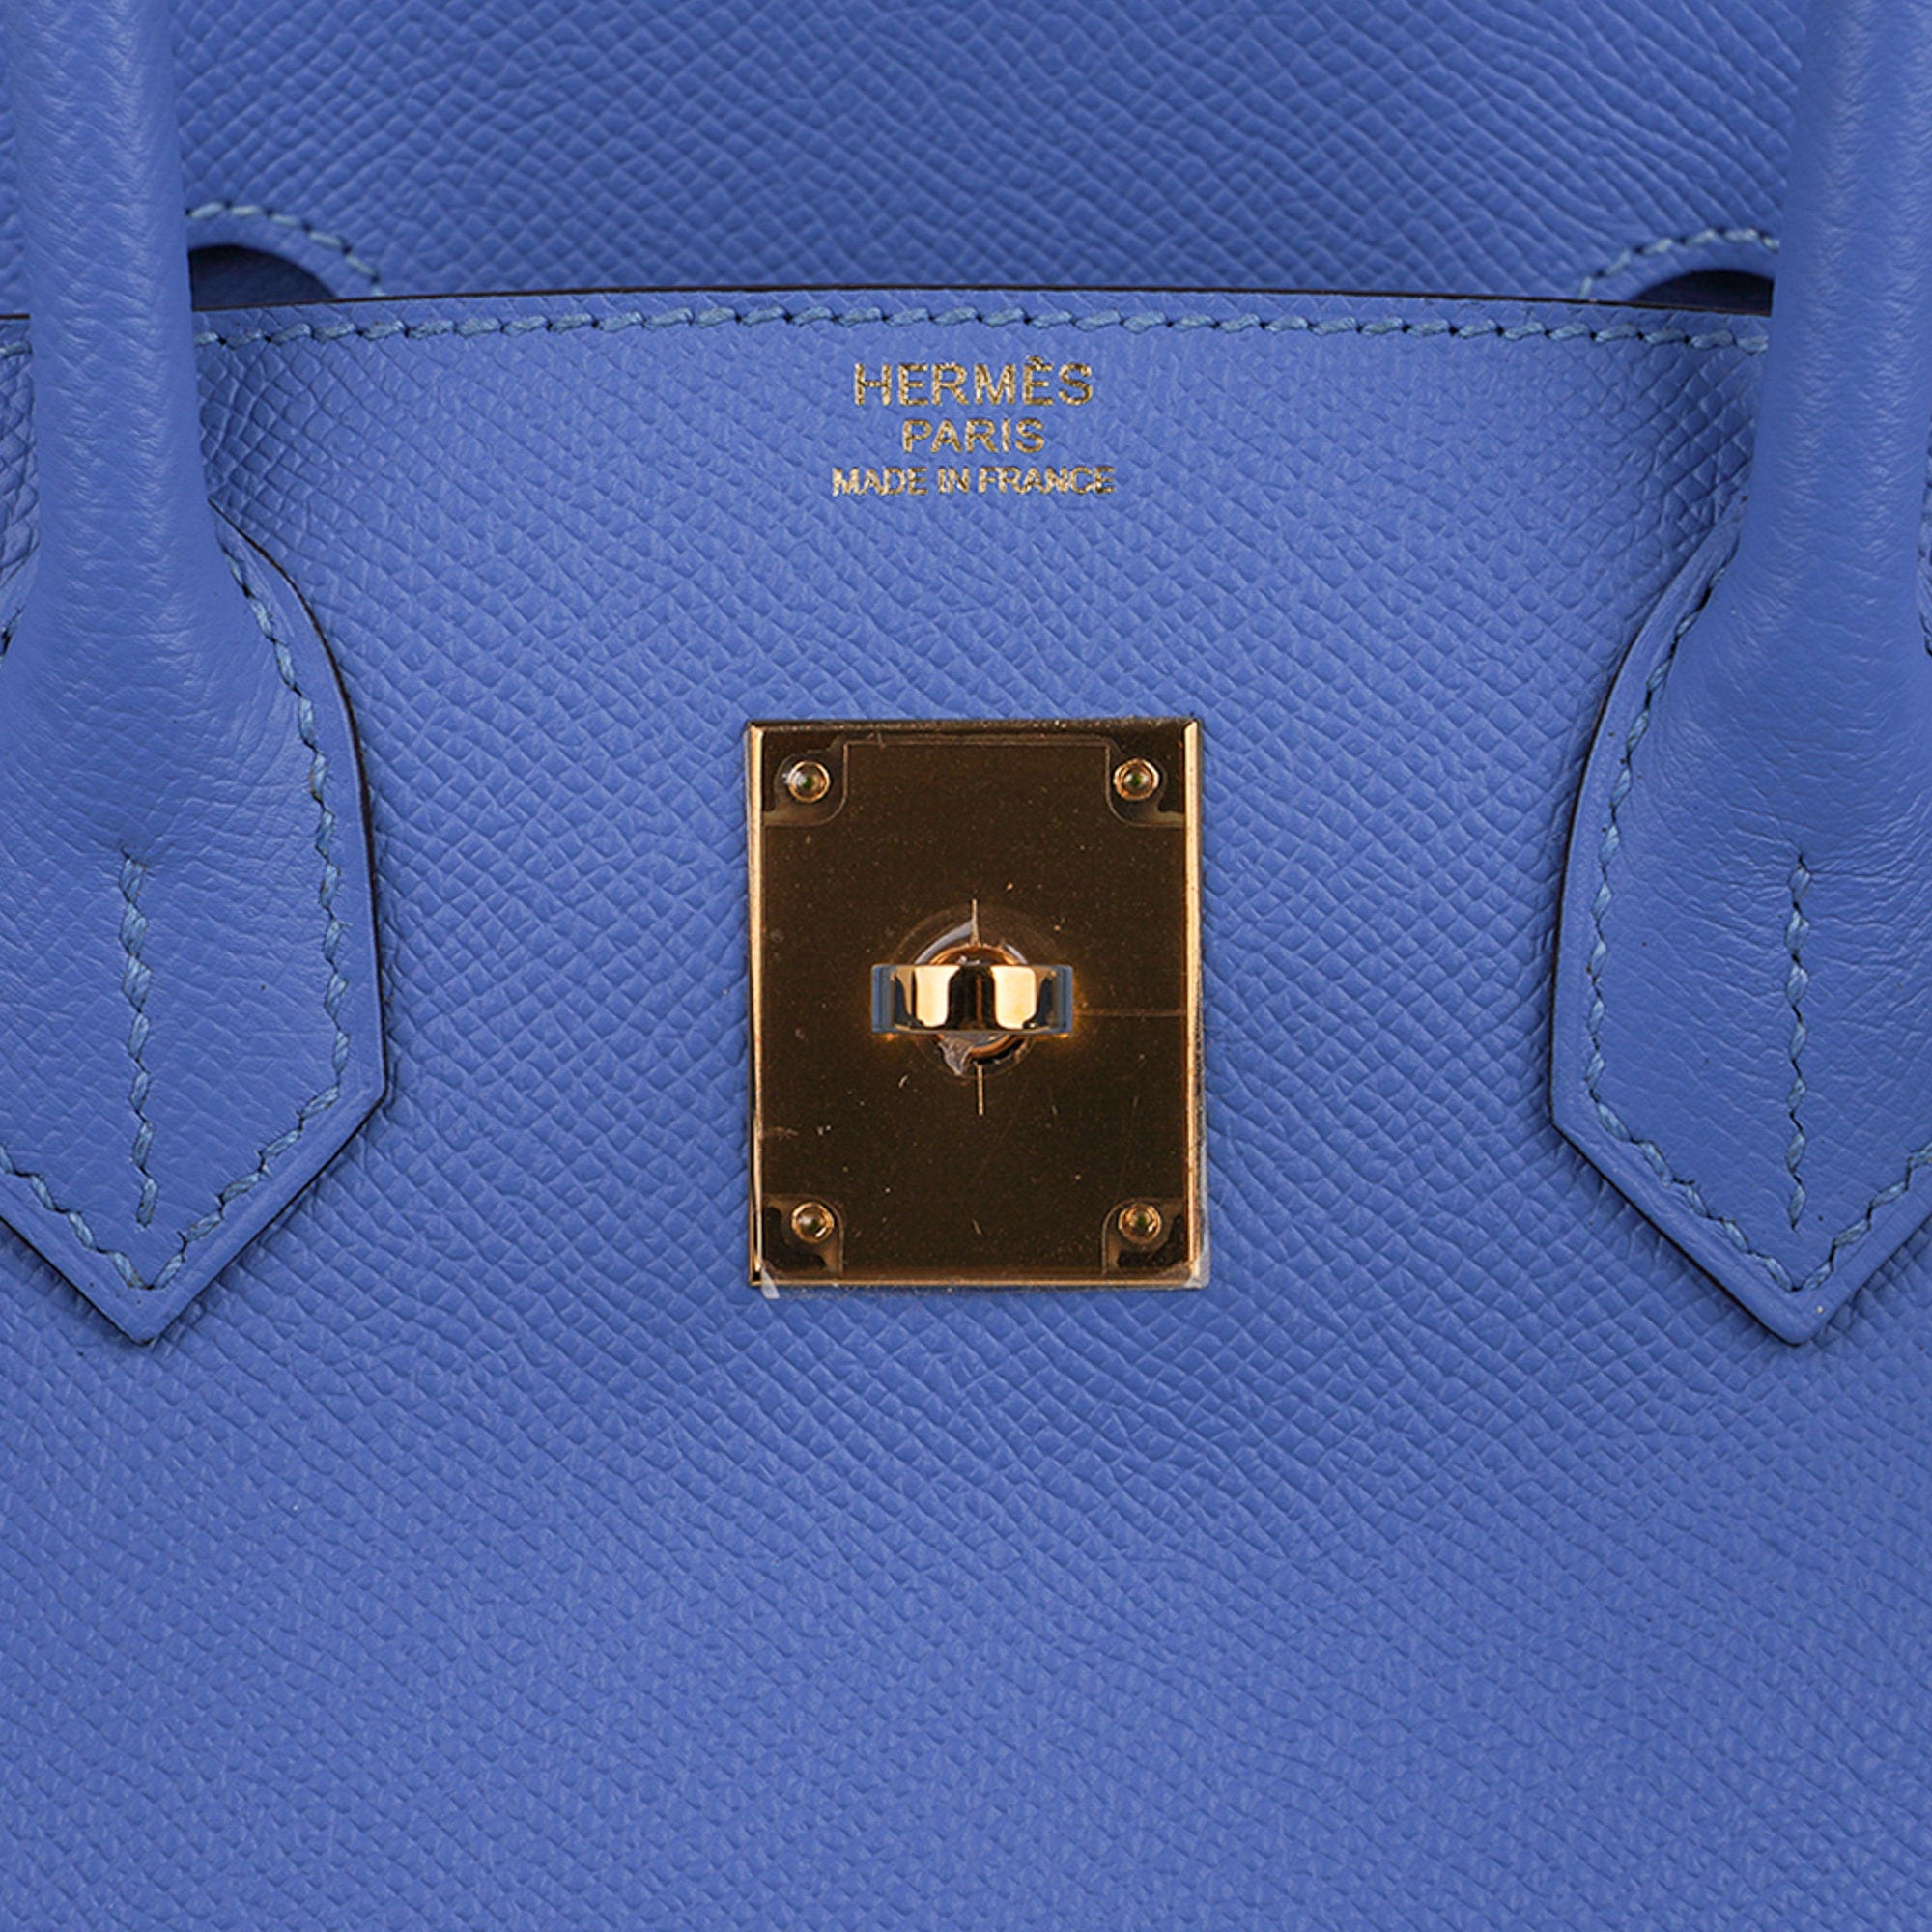 Hermès Bleu Electric Birkin 30cm of Epsom Leather with Gold Hardware, Handbags and Accessories Online, 2019